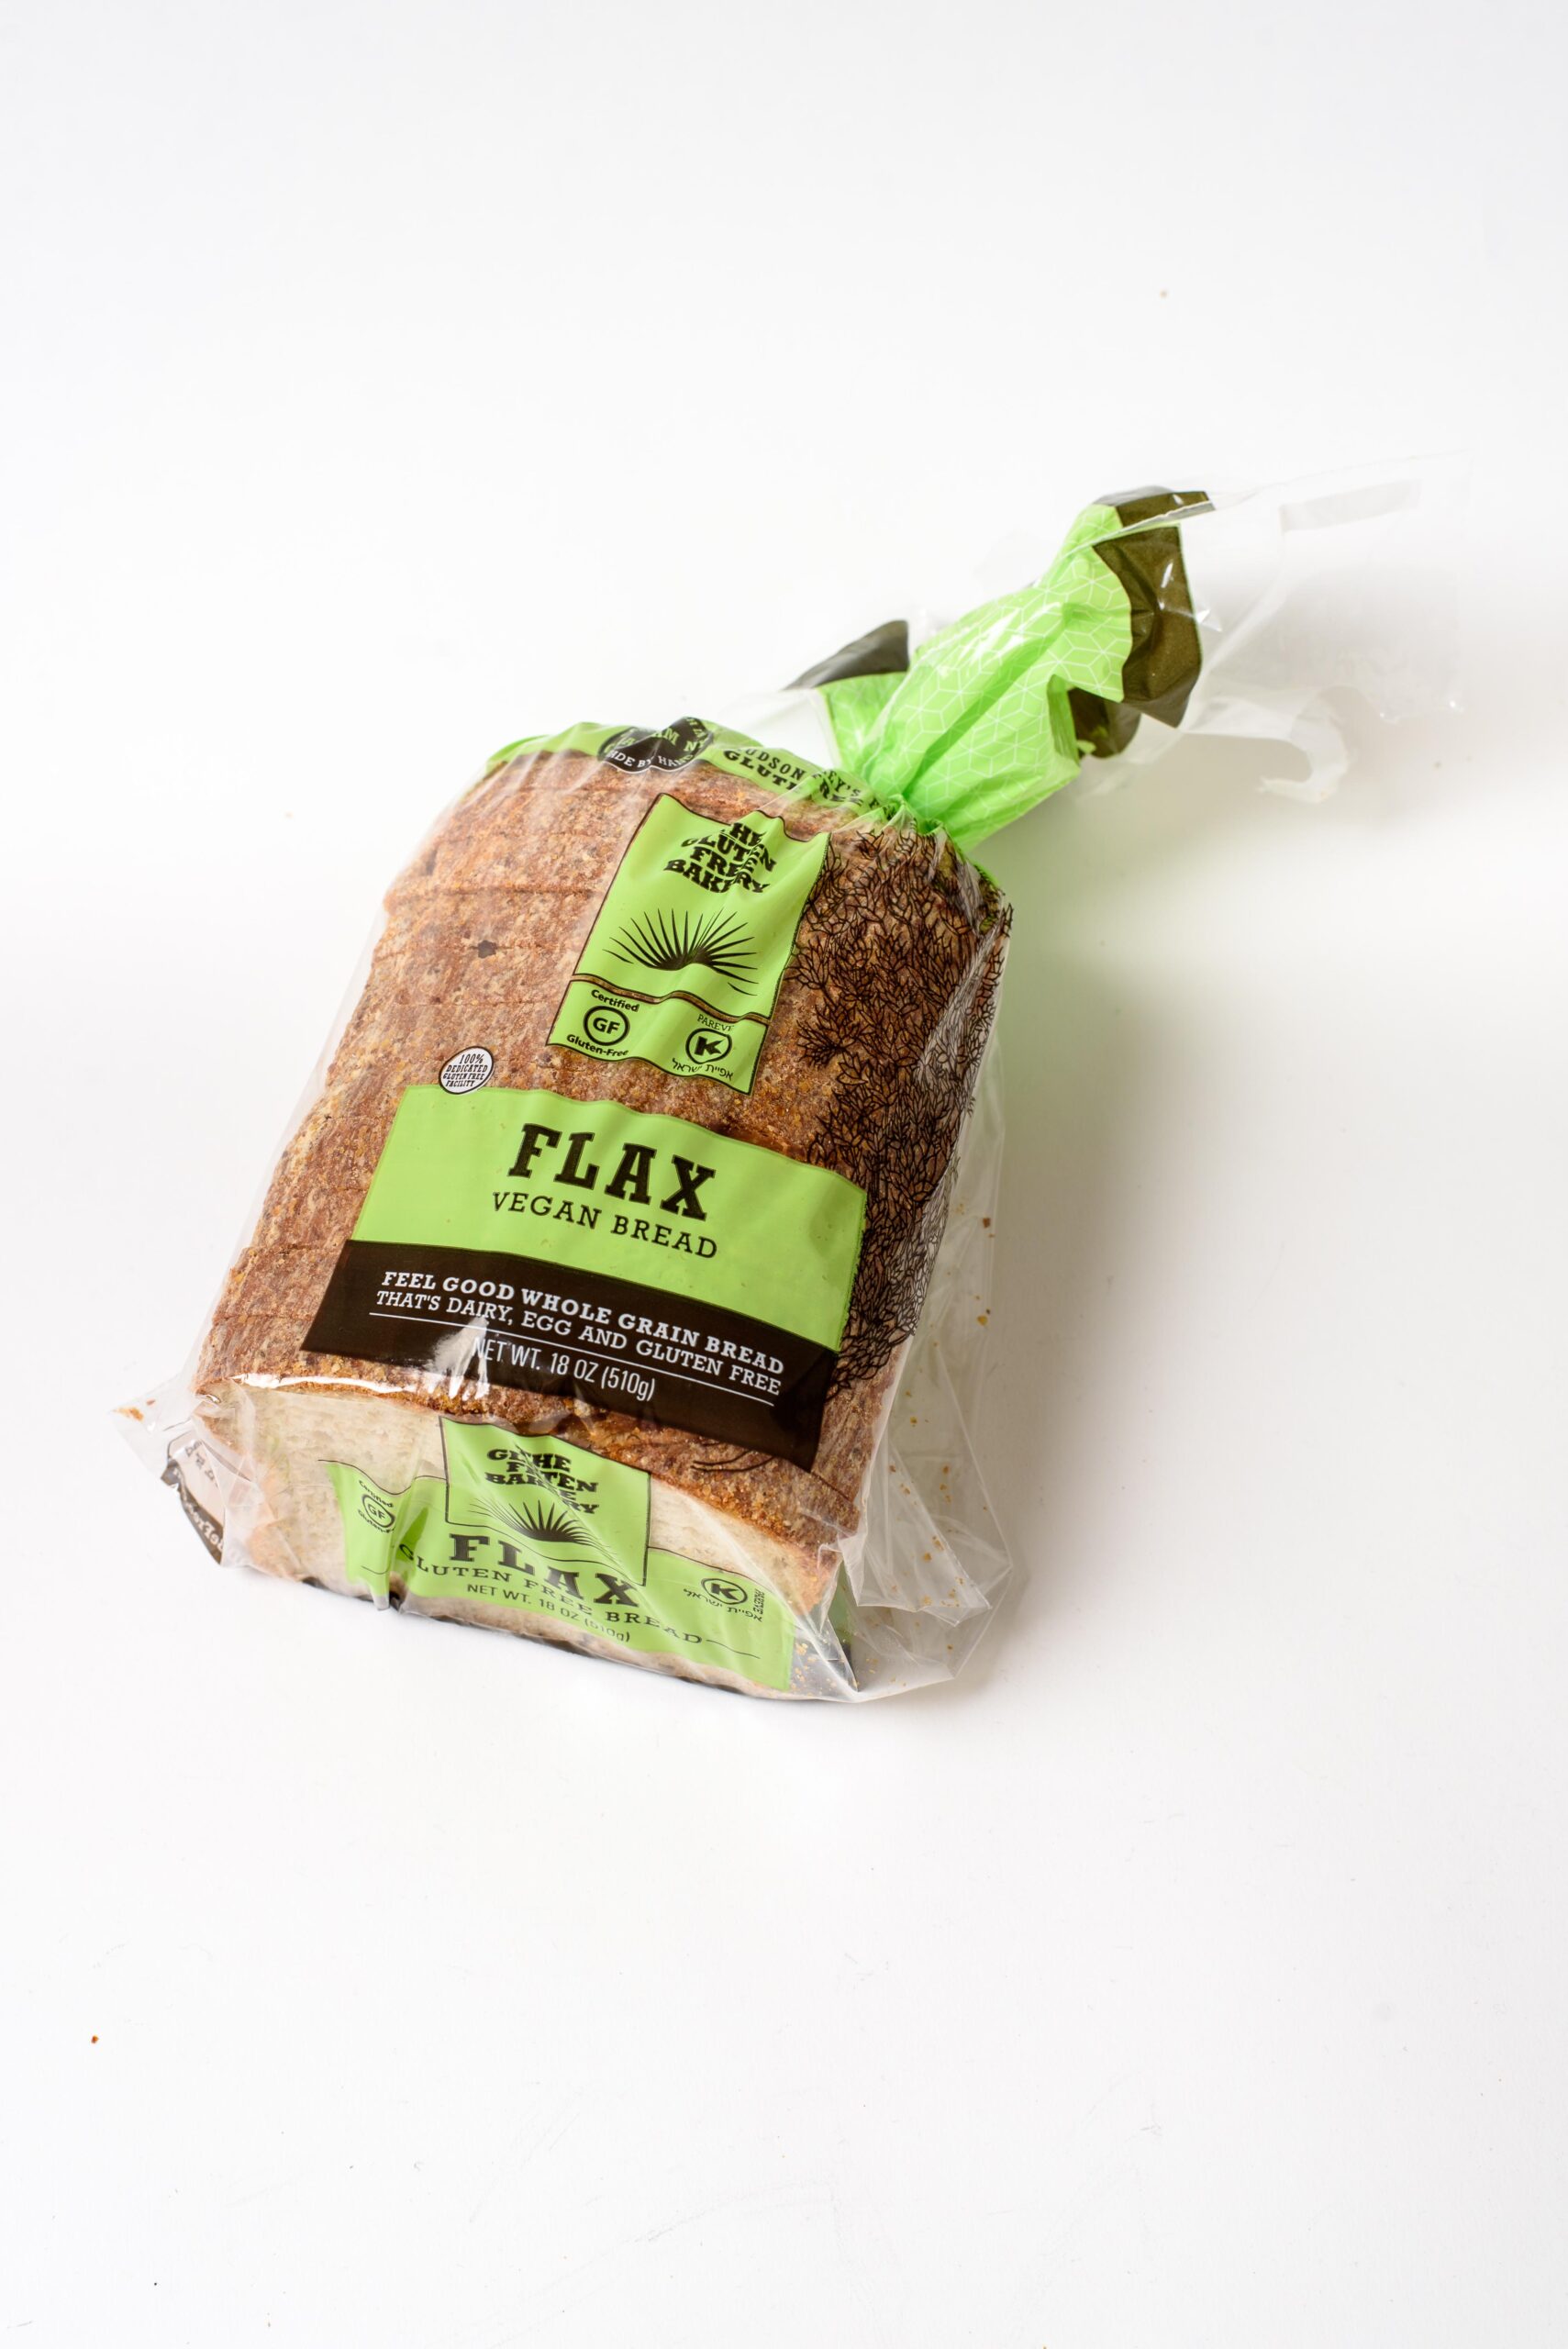  A bread that makes everyone happy - even those with gluten intolerance